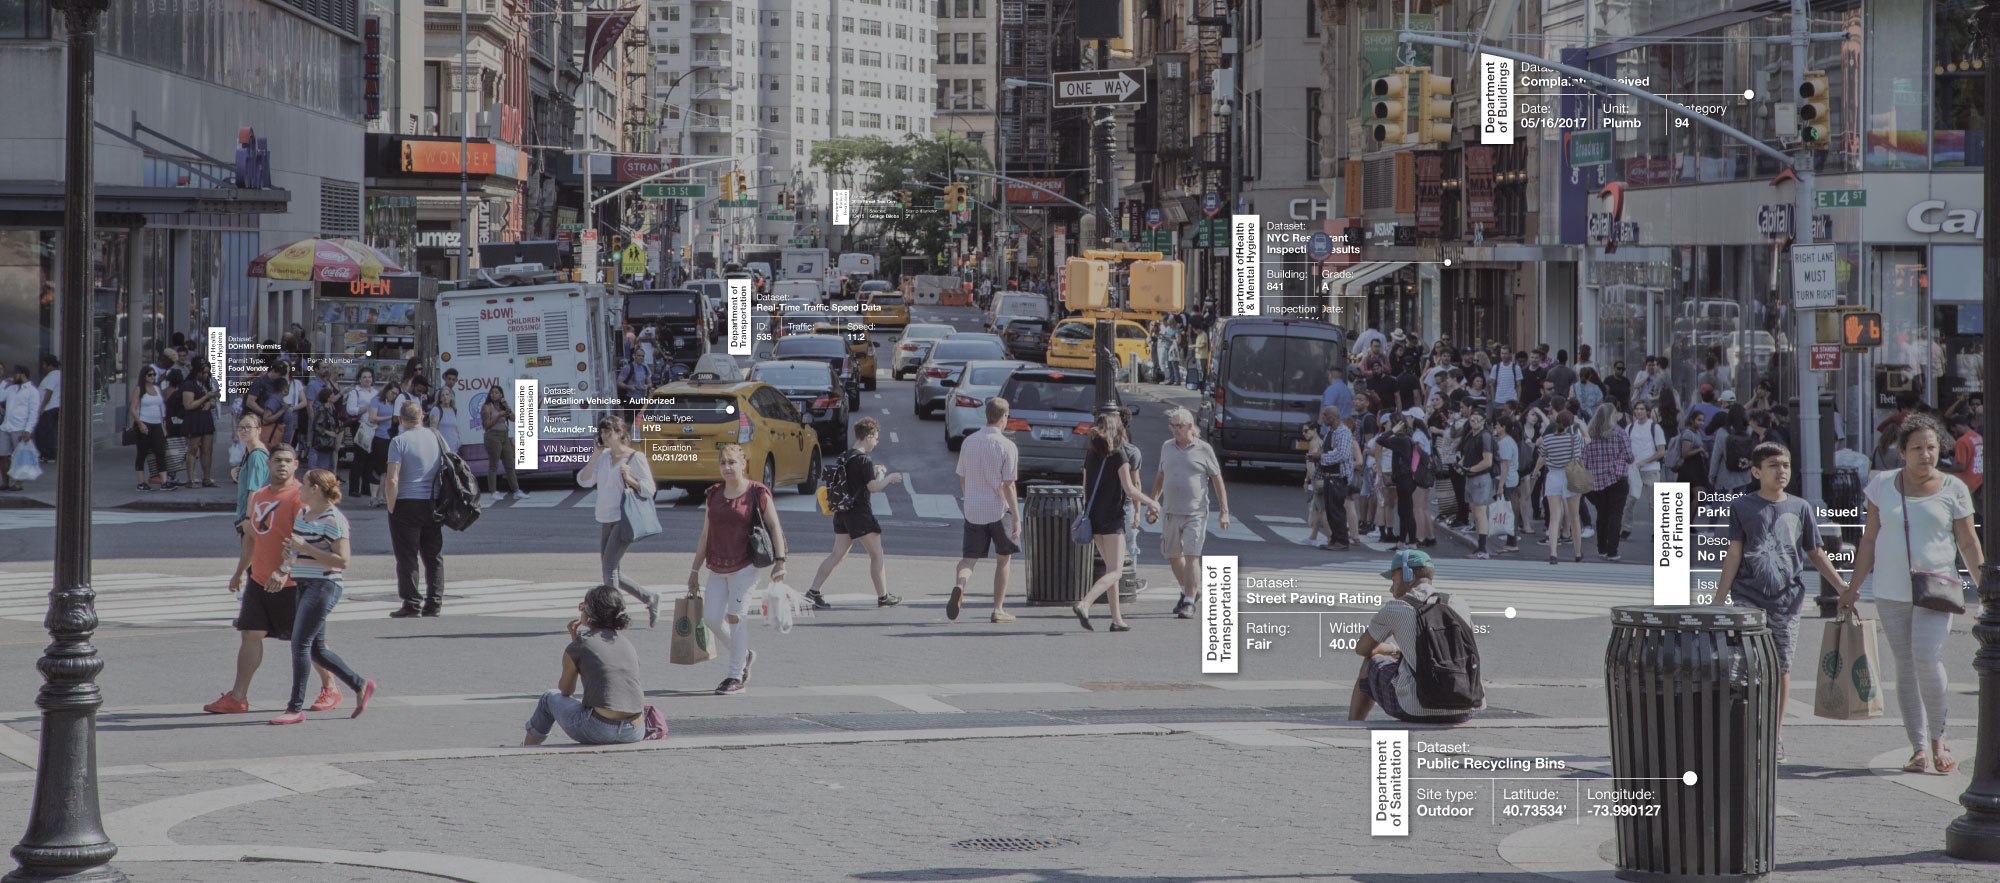 Photo of busy street with datasets visible.